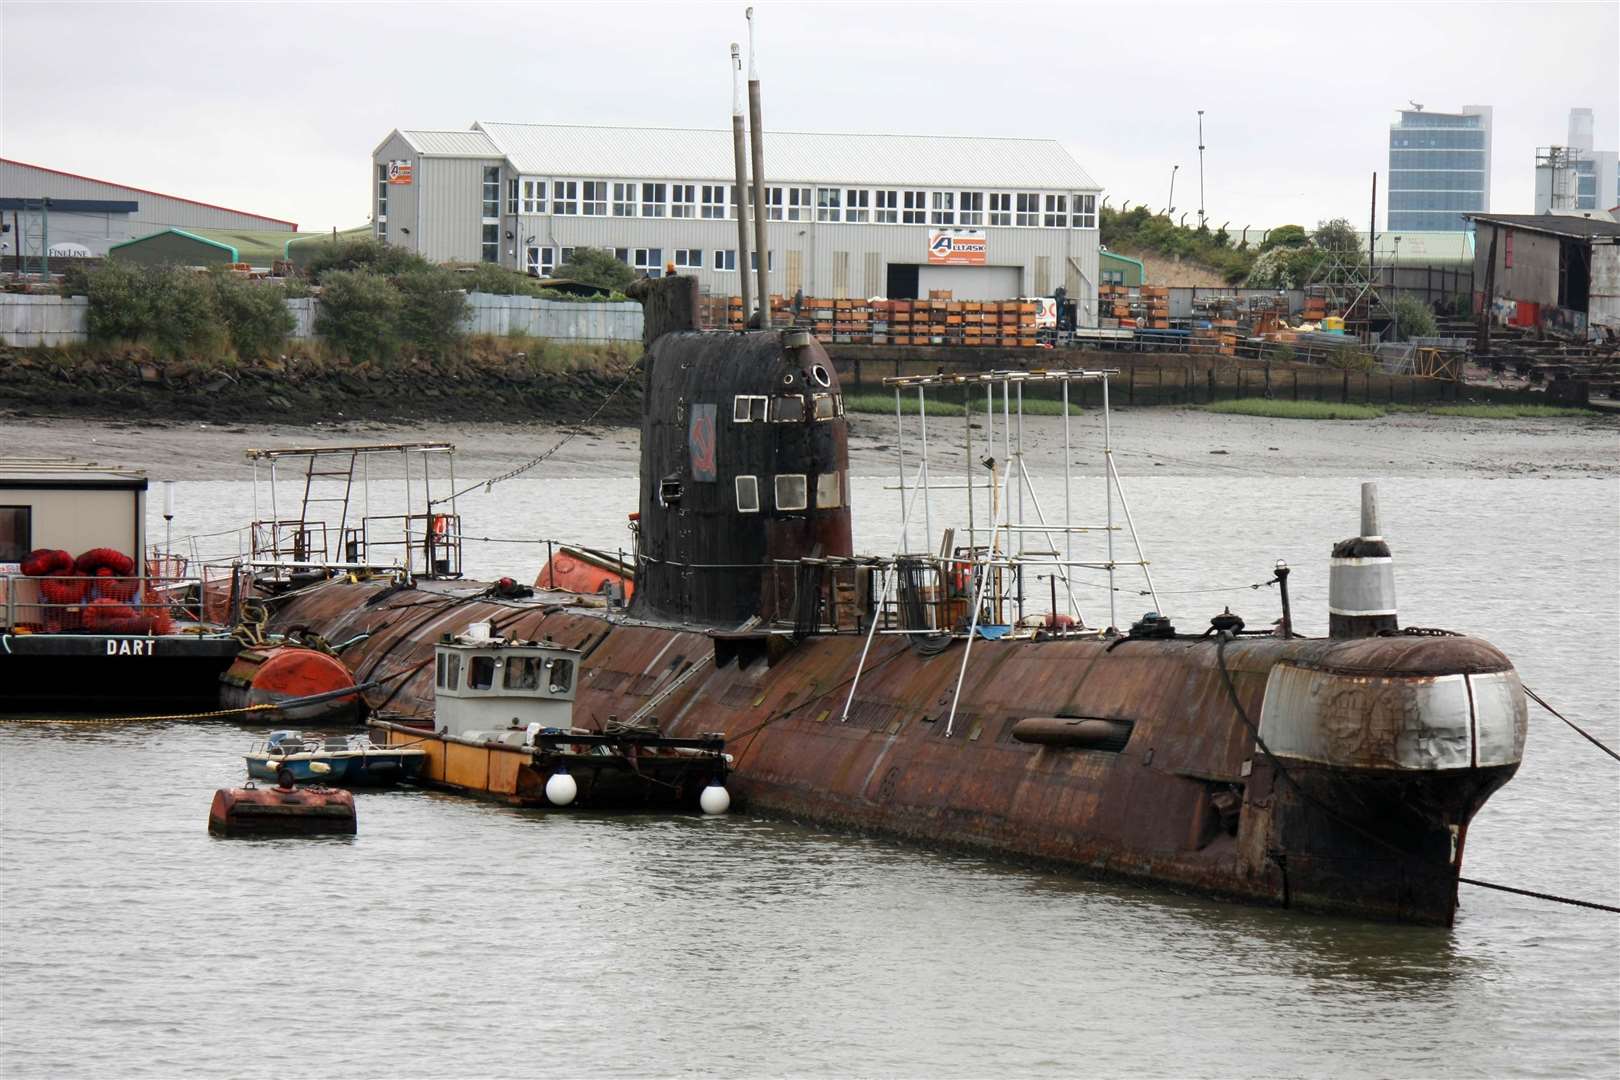 The Black Widow submarine at Strood